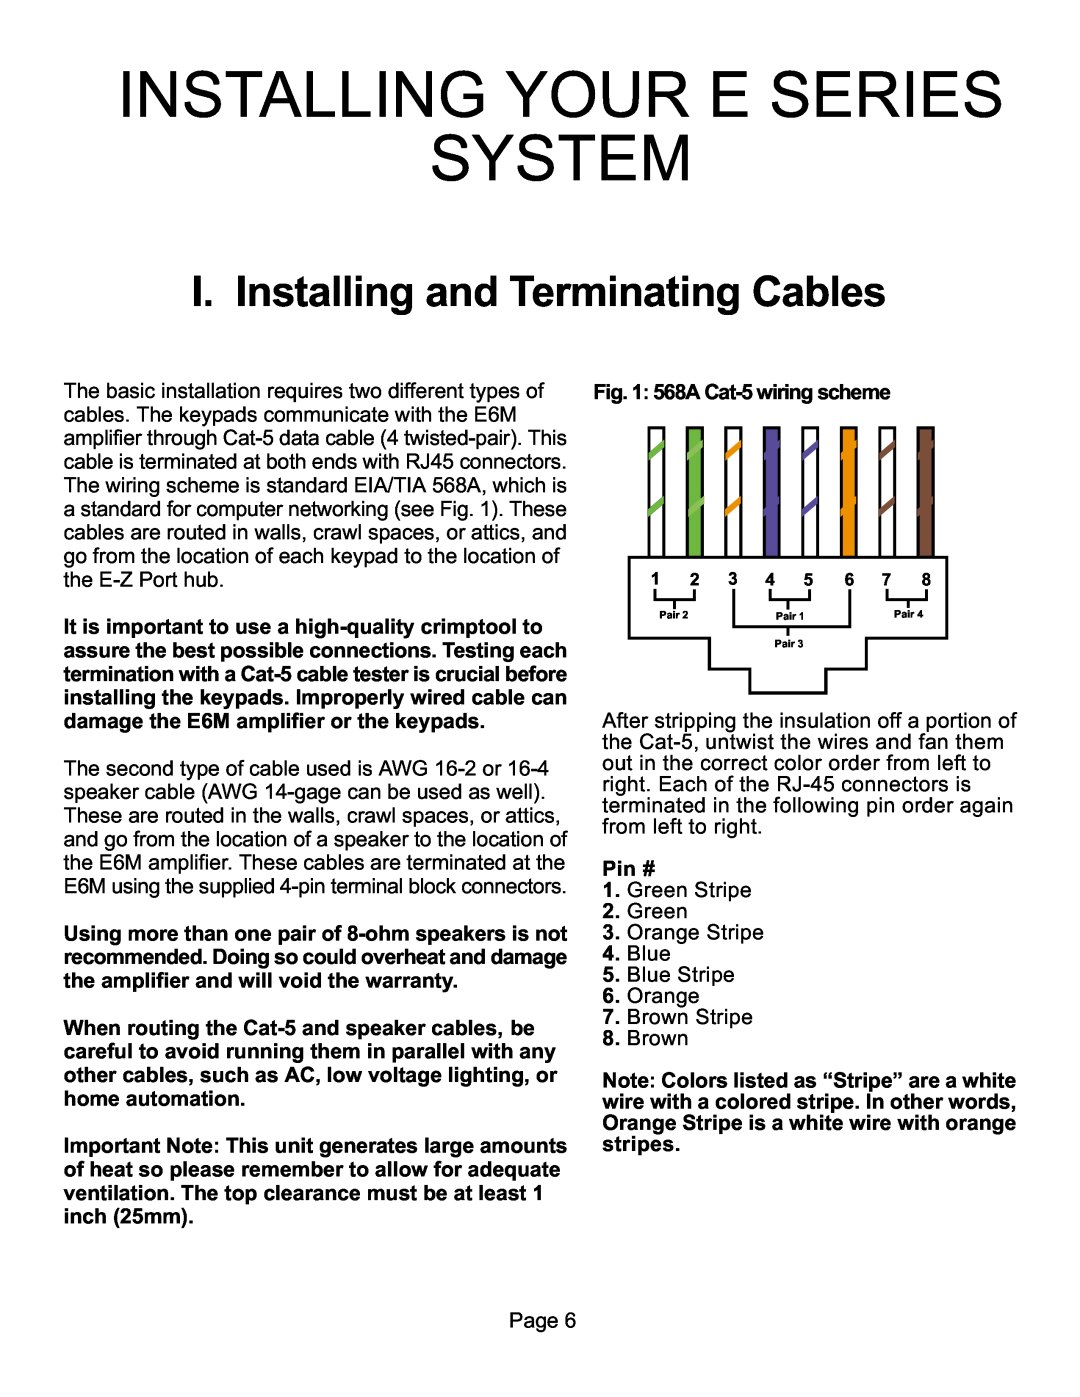 Nuvo NV-E6MS, NV-E6XS manual Installing Your E Series System, I. Installing and Terminating Cables 